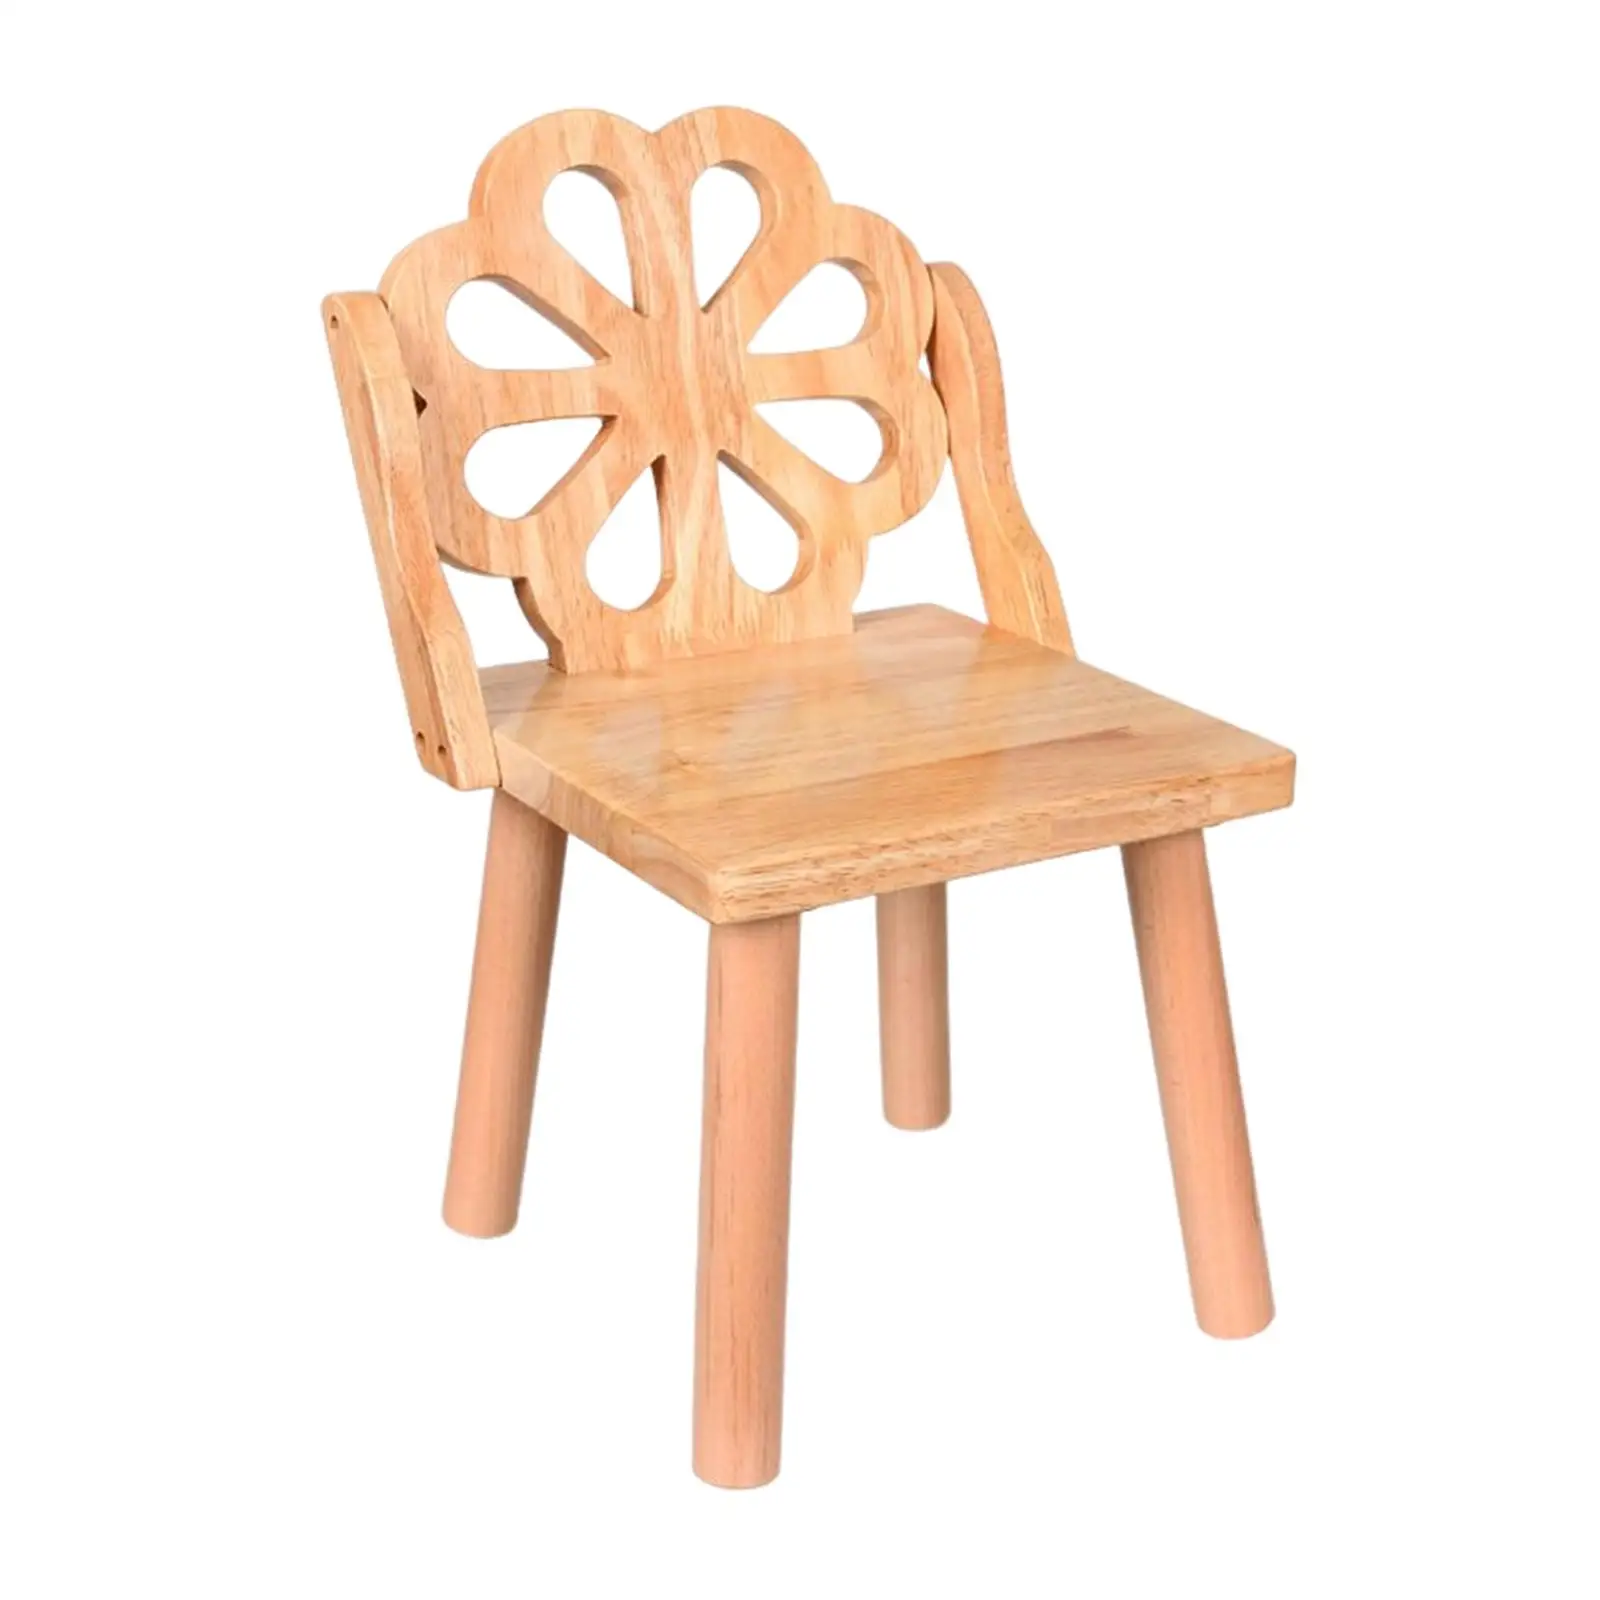 Household Removable Wooden Child Stool Lightweight Wooden for Nursery